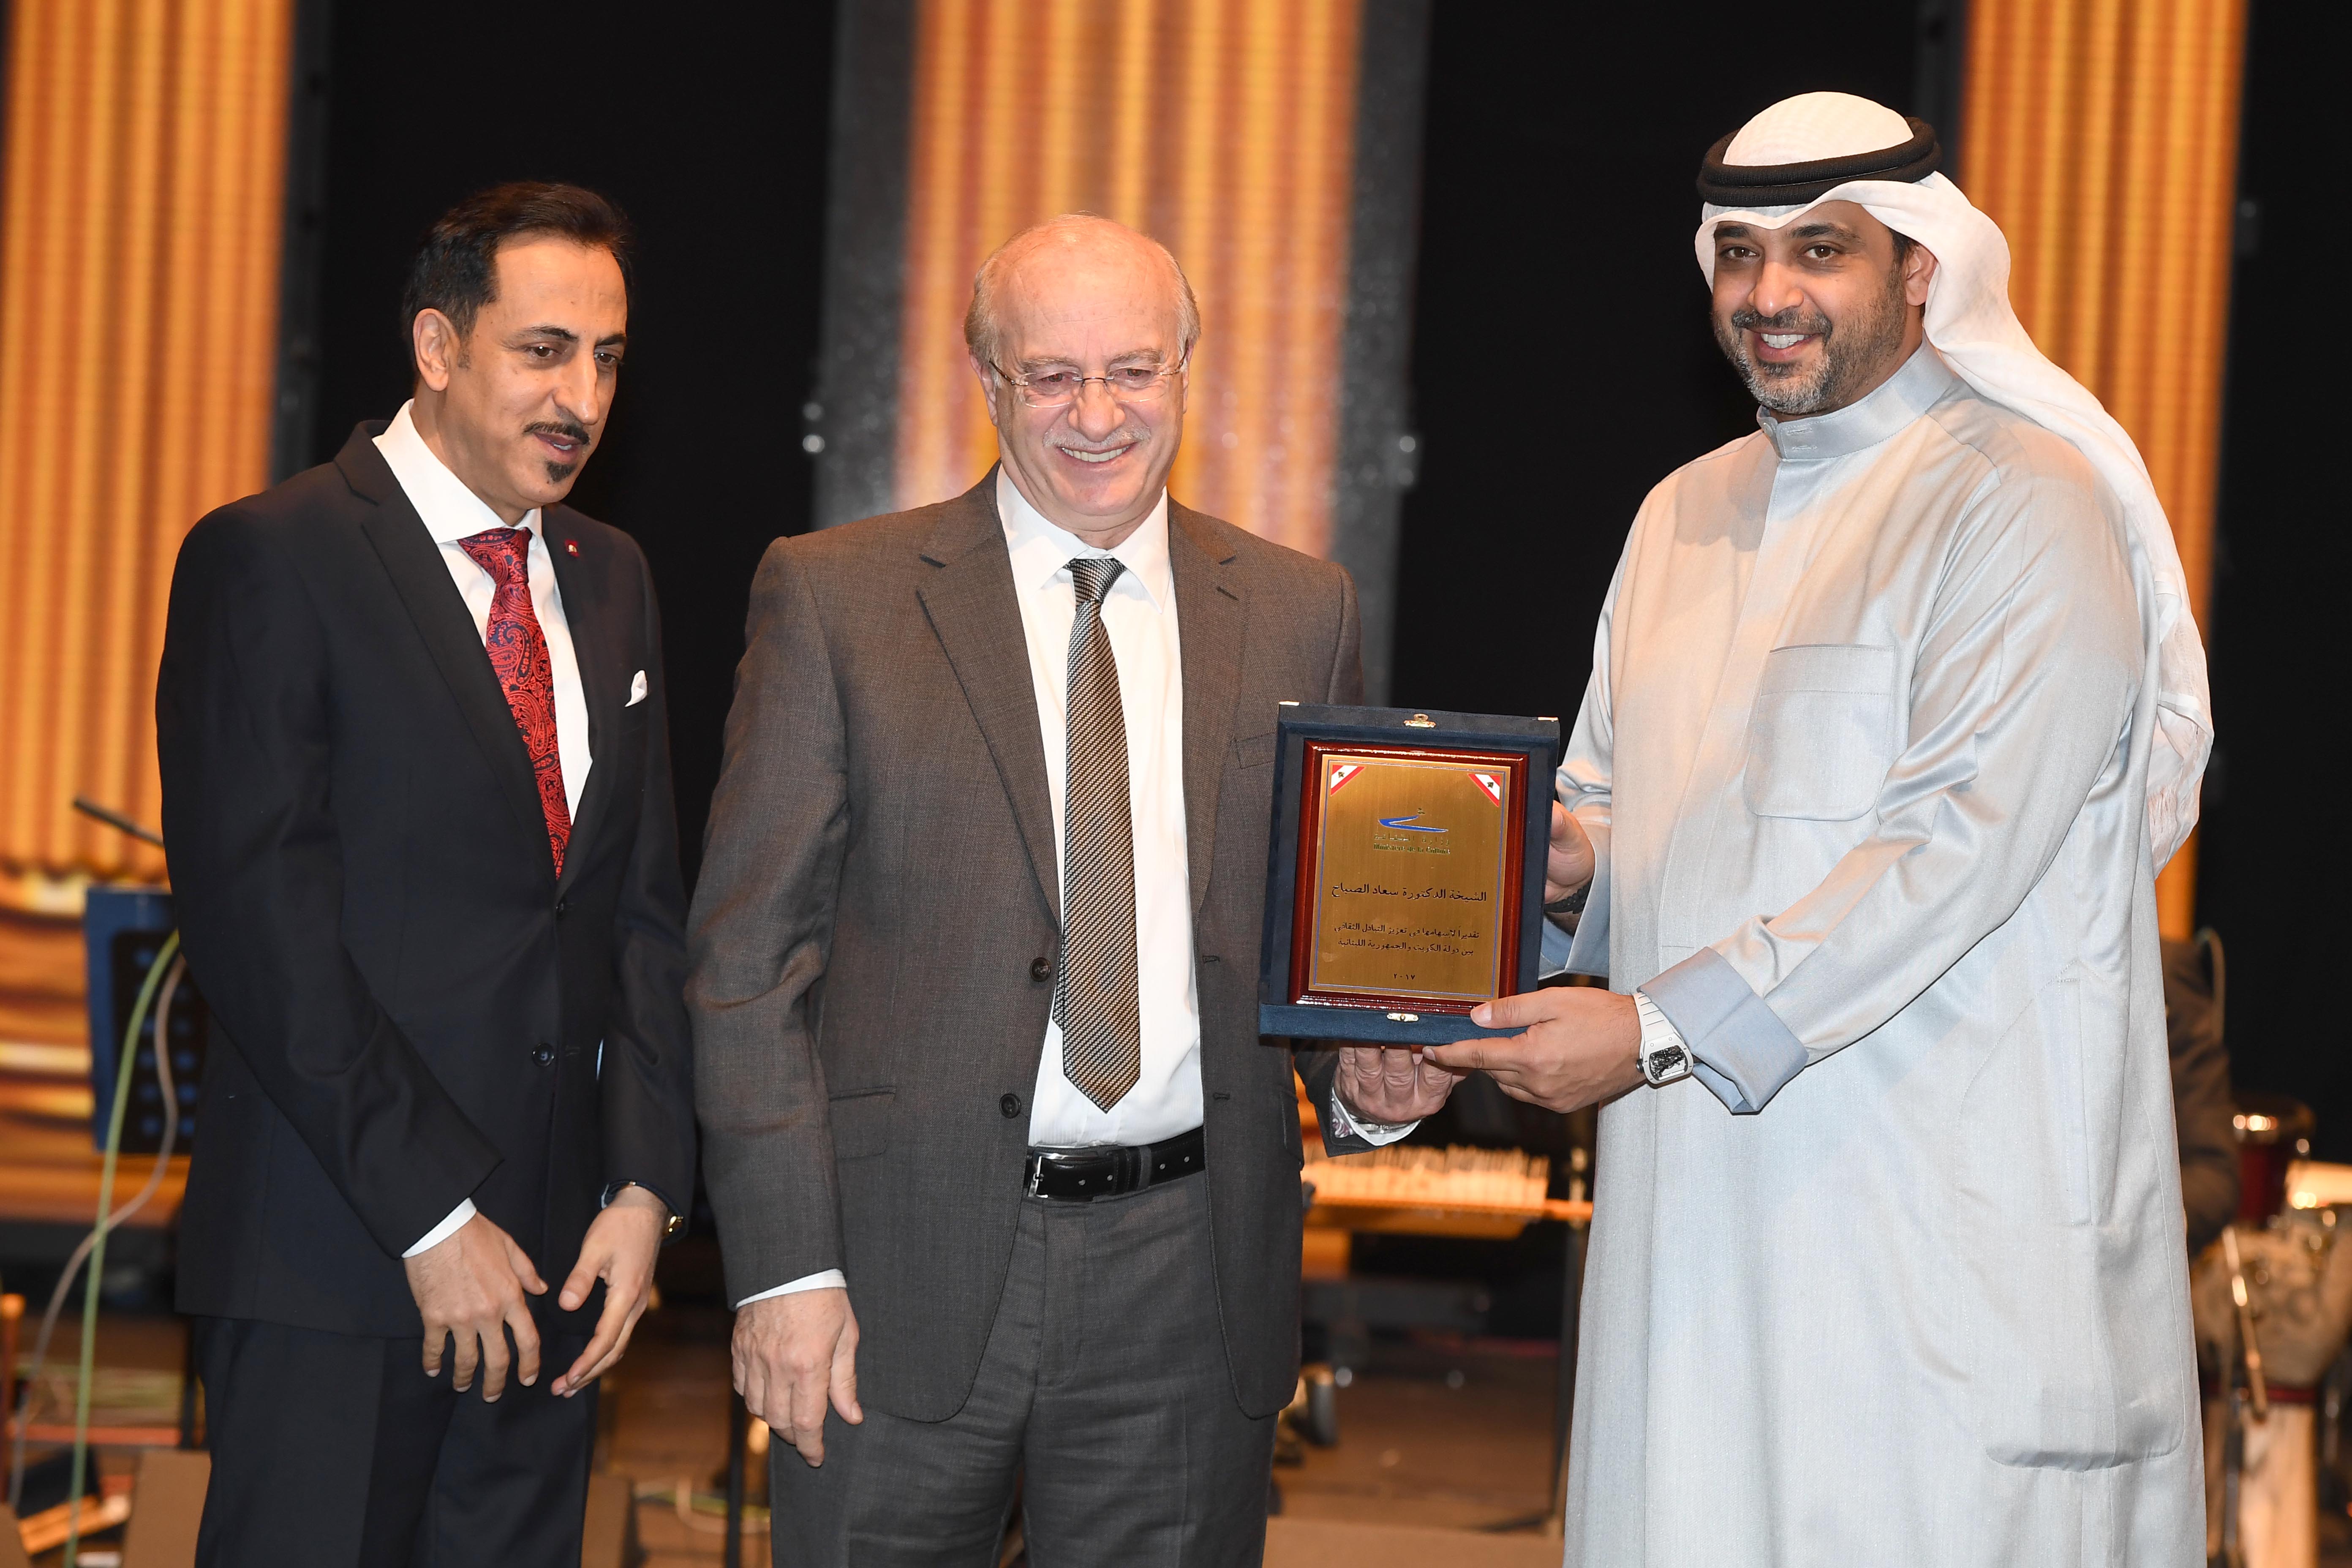 Kuwaiti State Minister for Cabinet Affairs and Acting Information Minister Sheikh Mohammad Abdallah Al-Sabah Honours Lebanon's visiting Culture Minister Ghattas Khoury